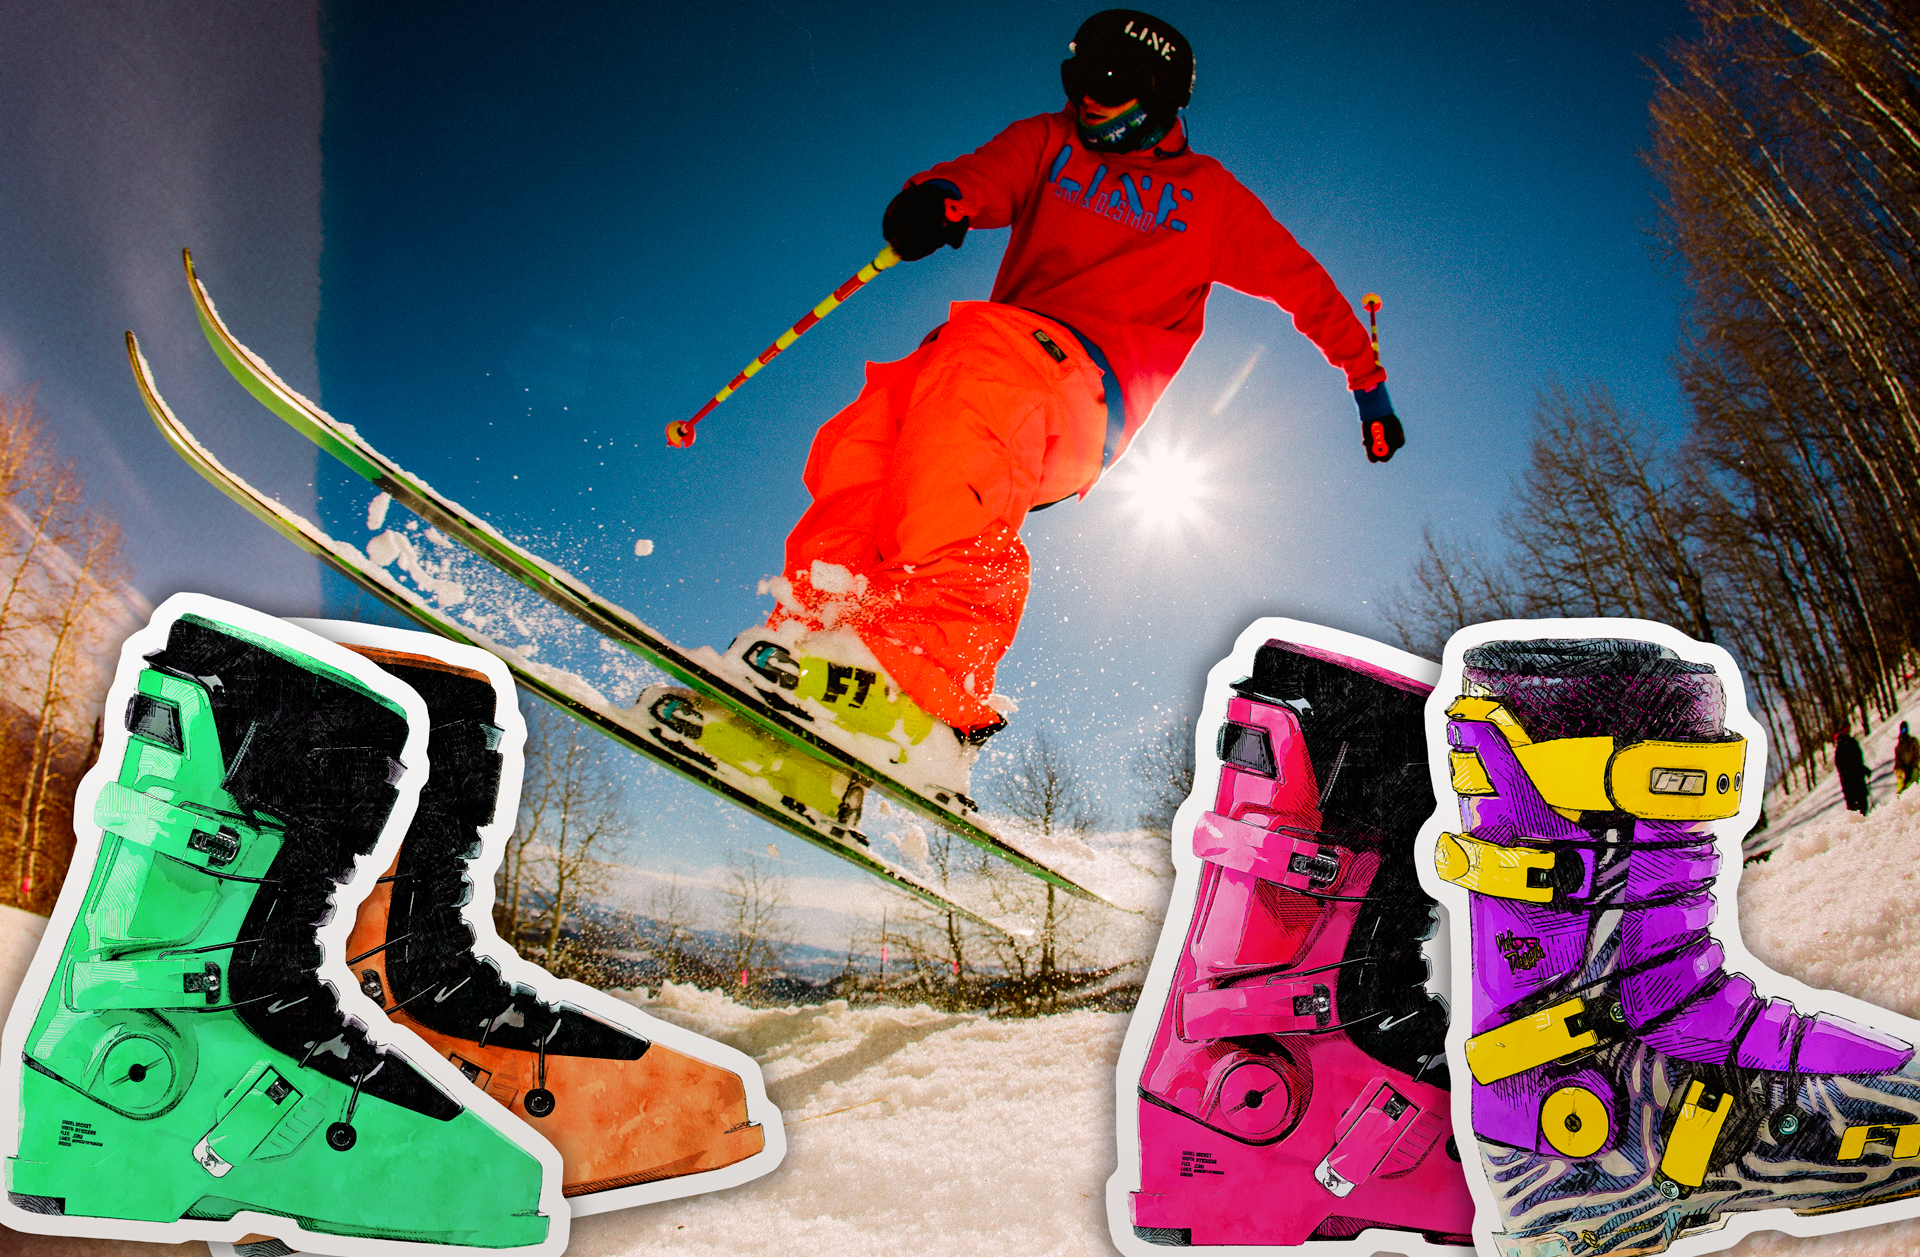 Graphic of stickers featuring ski boots overlaid on photo of skier Andy Parry